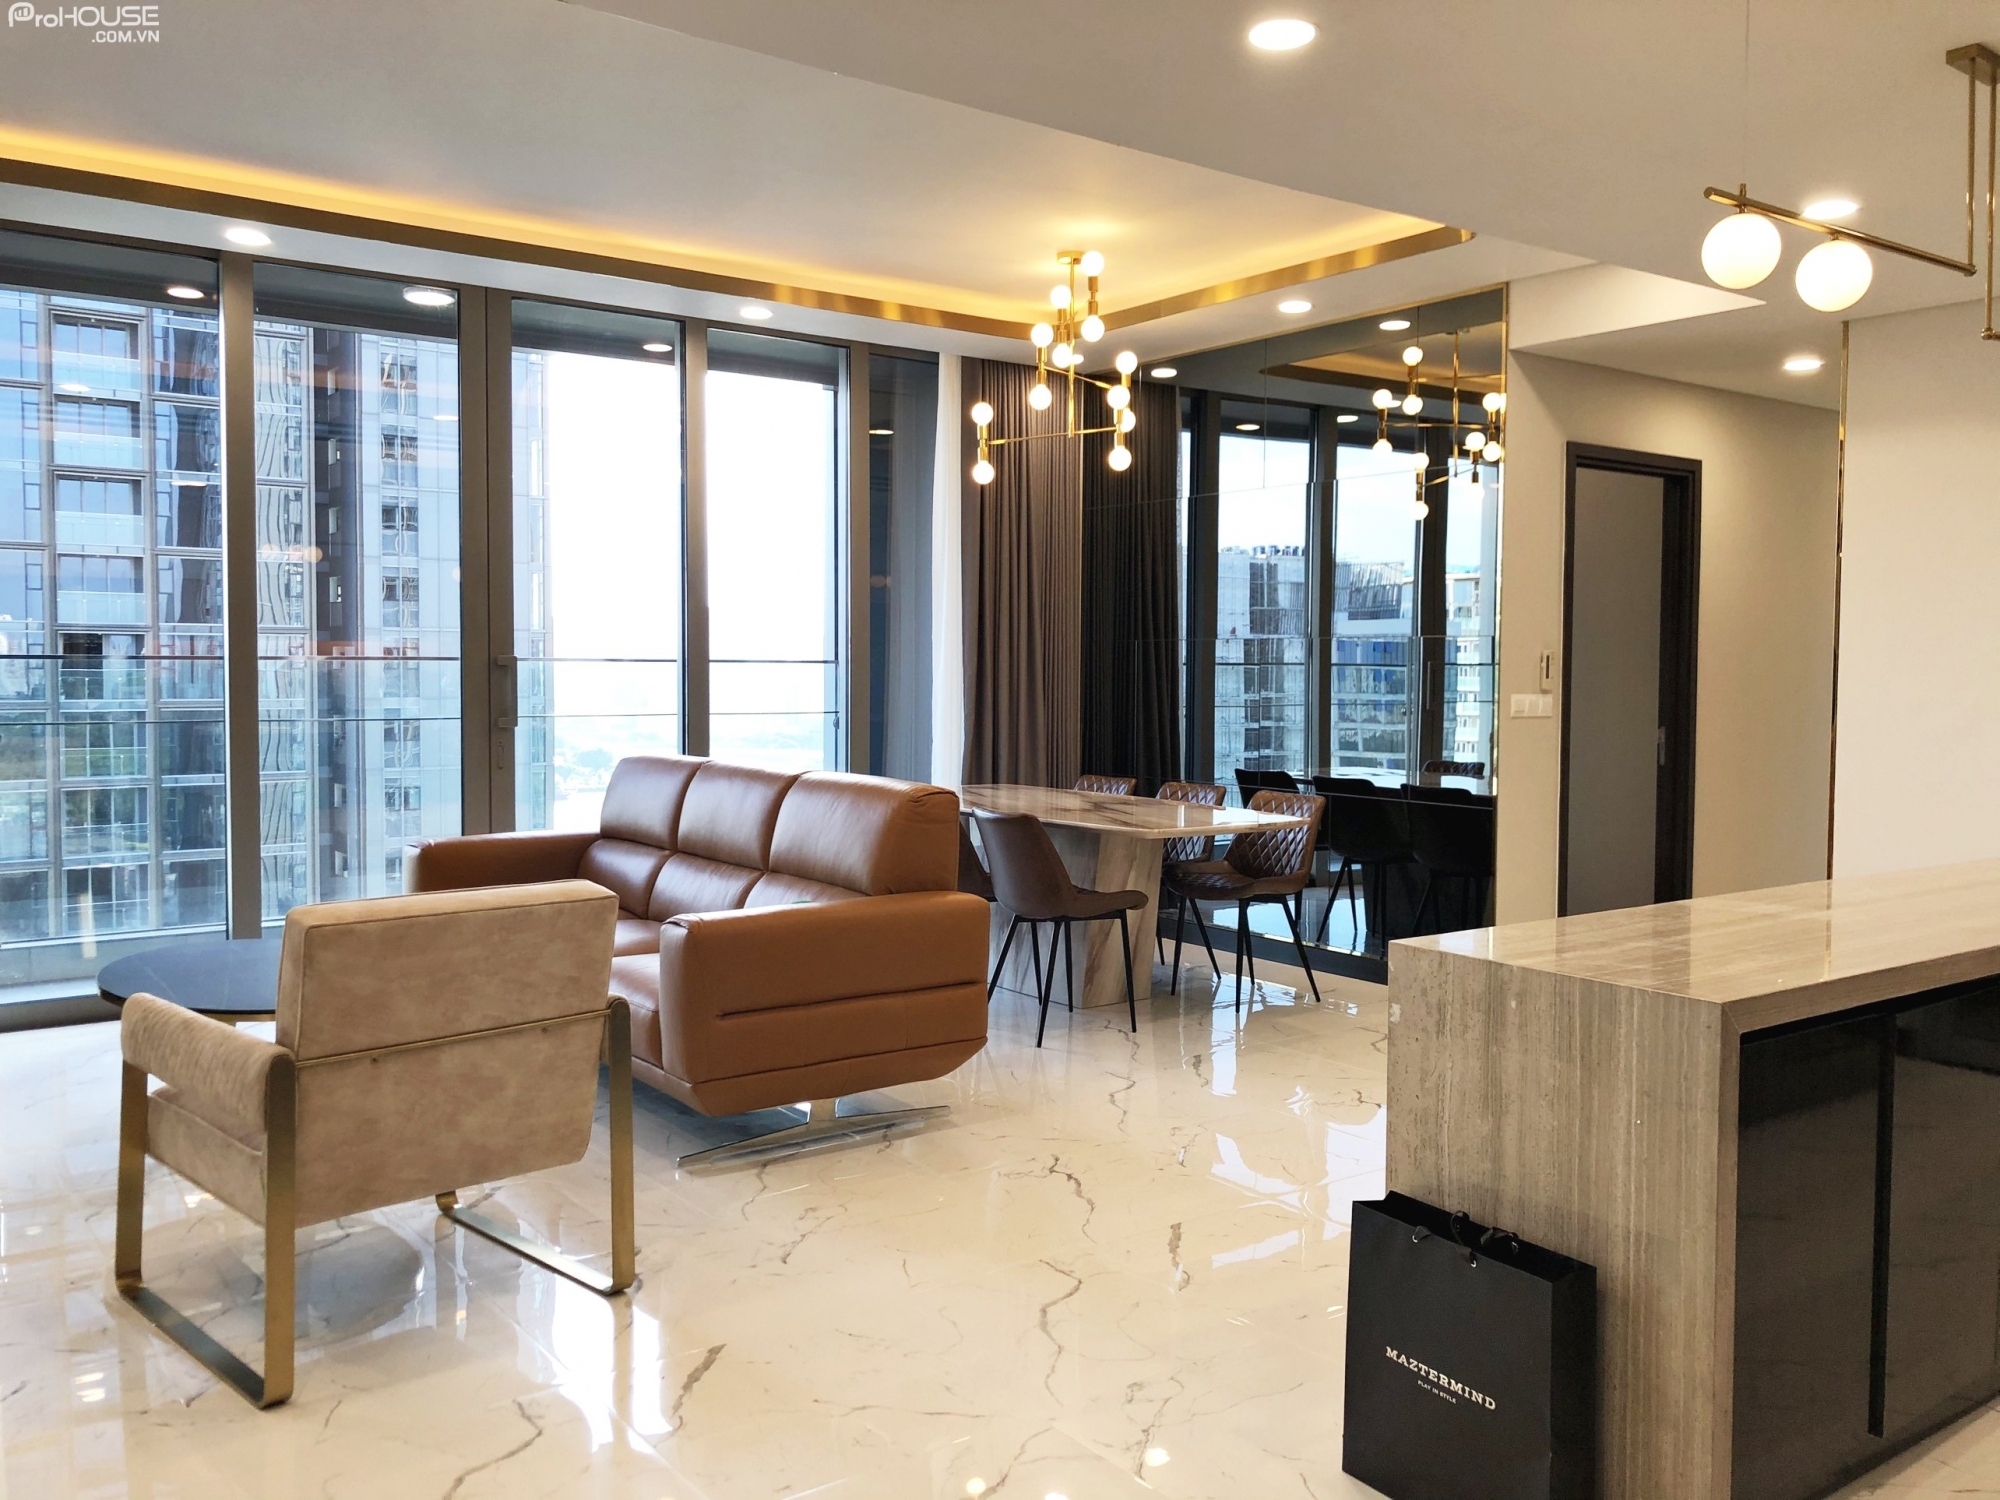 Luxury apartment for rent with modern design 3 bedrooms in Empire City